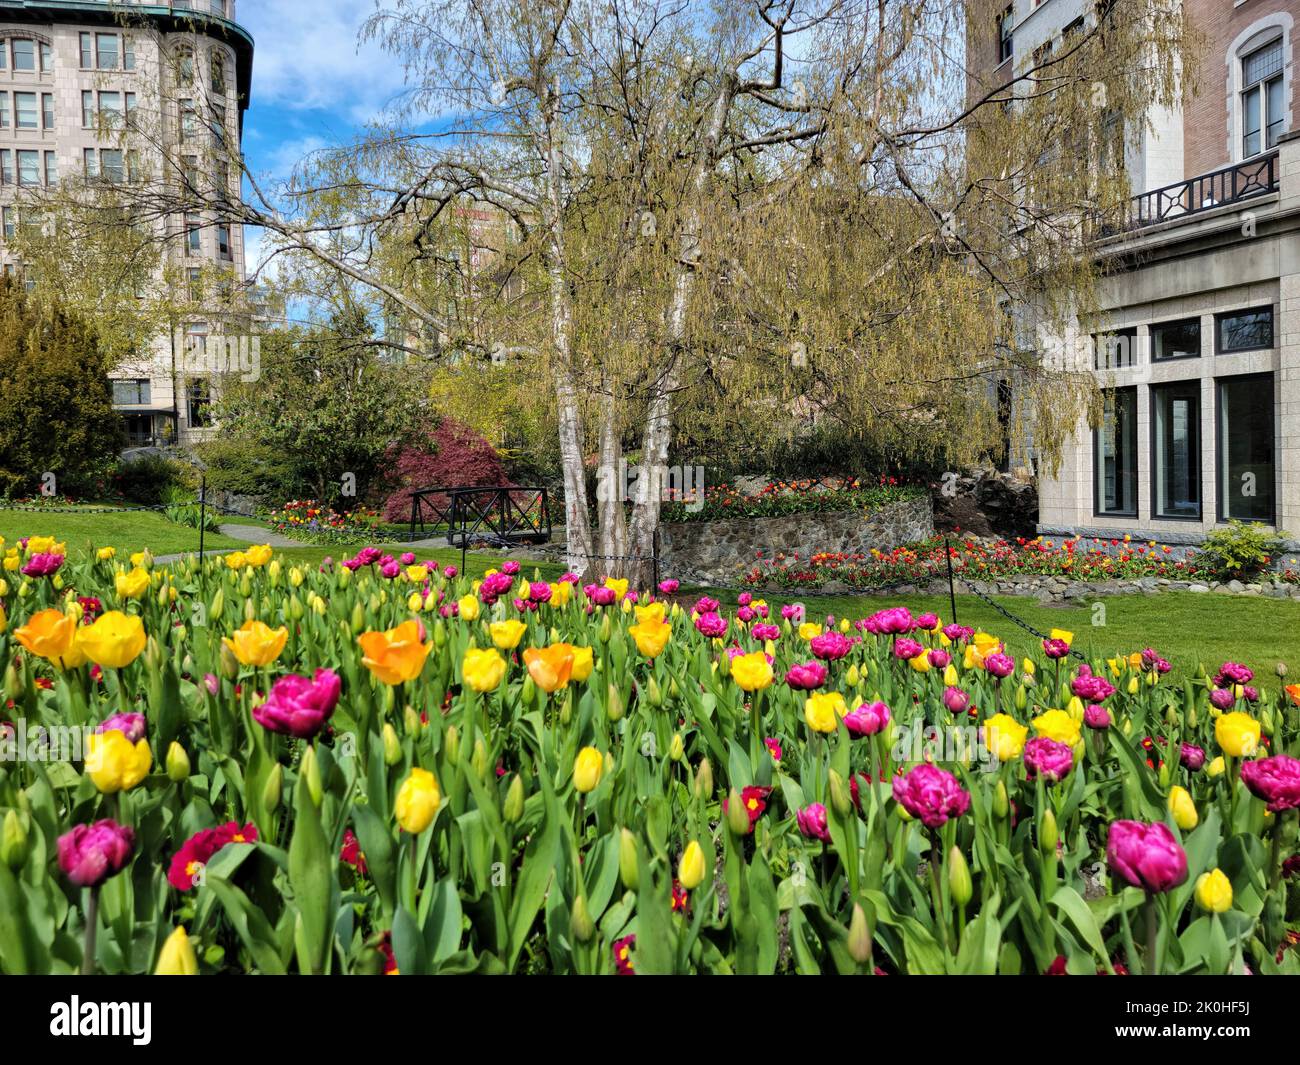 The close-up view of Chinese peony flowers and tulips in the garden between the buildings Stock Photo